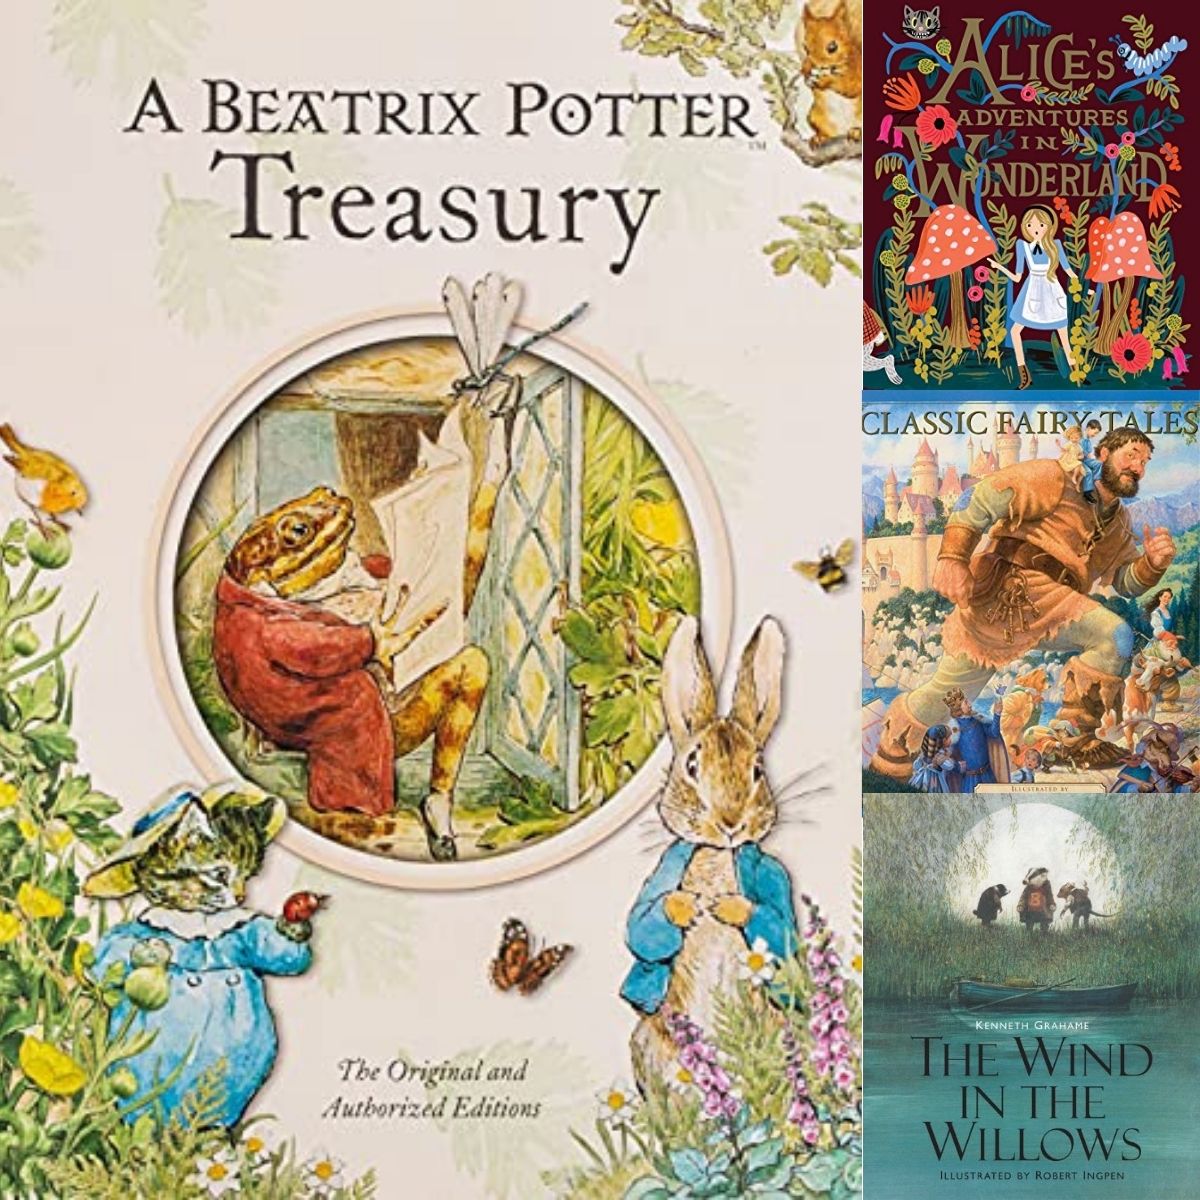 A photo collage shows several best classic books for kids.